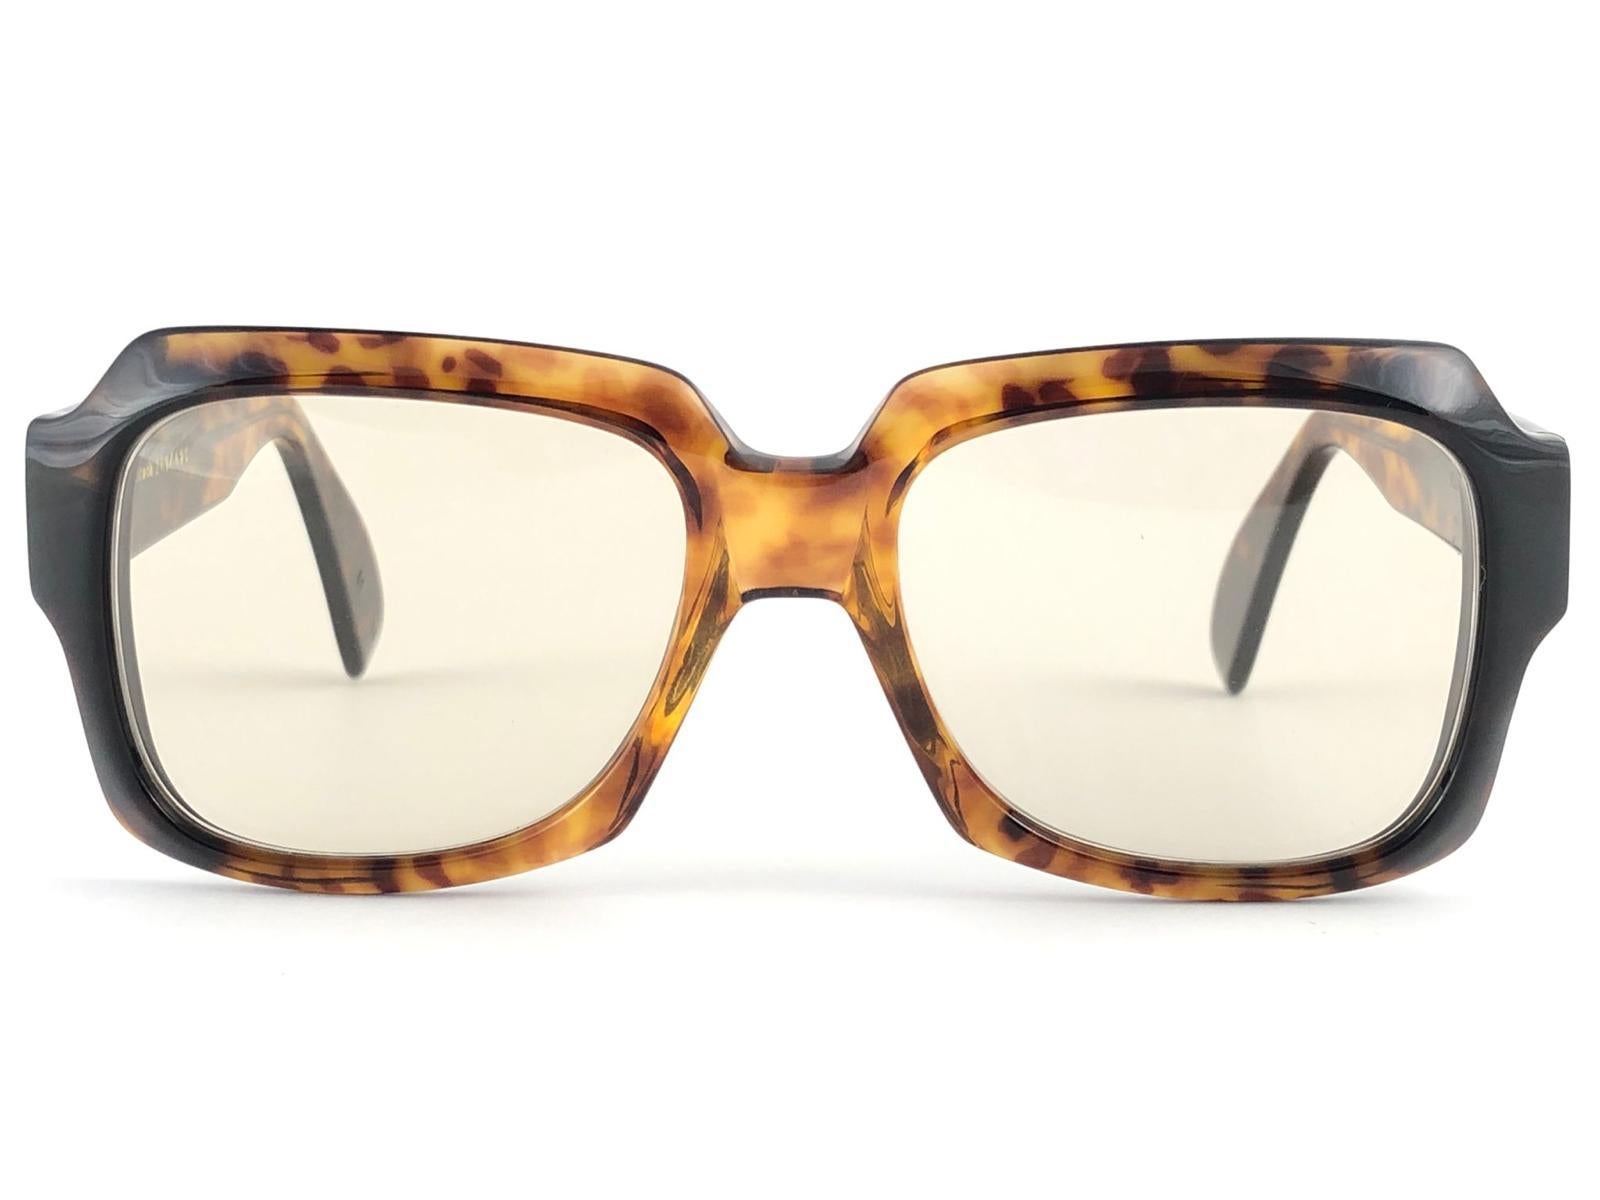 New vintage Zollitsch 301 tortoise robust oversized frame. Spotless medium green lenses.
This pair have slight wear on them due to to nearly 40 years of storage.  

FRONT : 14.5 CM
LENS  HEIGHT : 4.4 CMS
LENS WIDTH : 5.3 CMS
TEMPLES : 14 CMS
